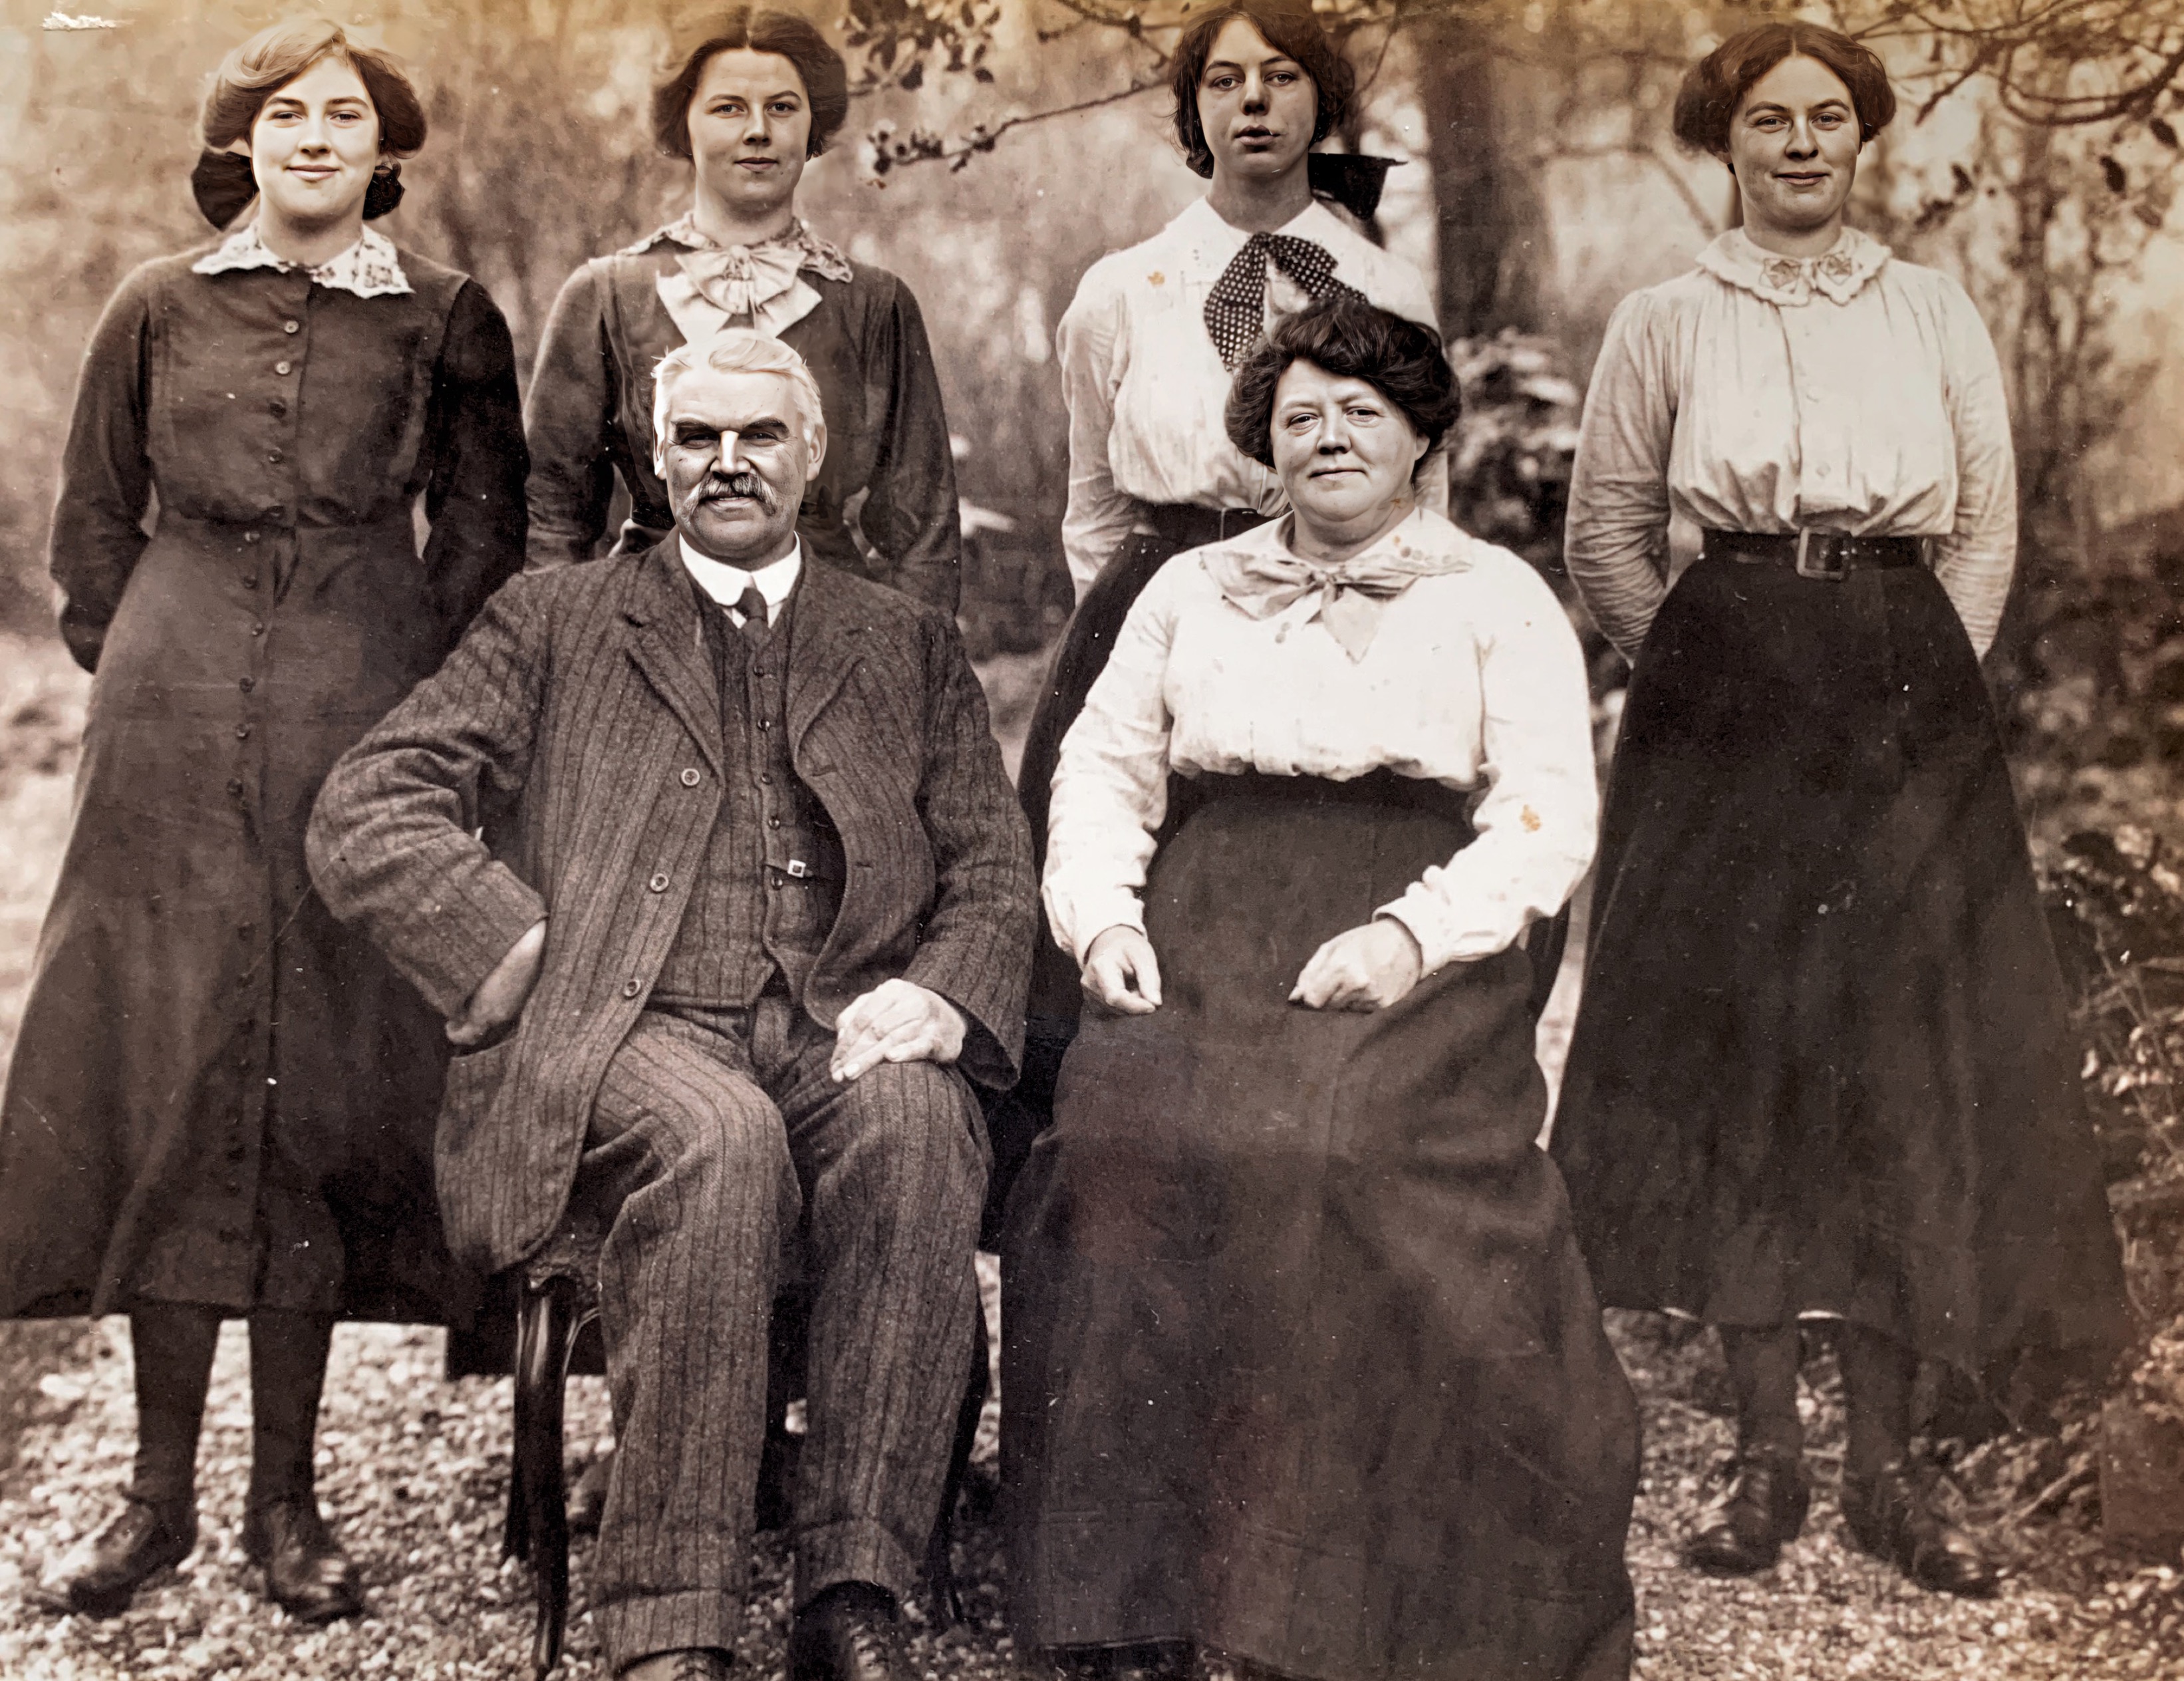 1914 photo of grandmother (Williams) back left and great grandparents front row